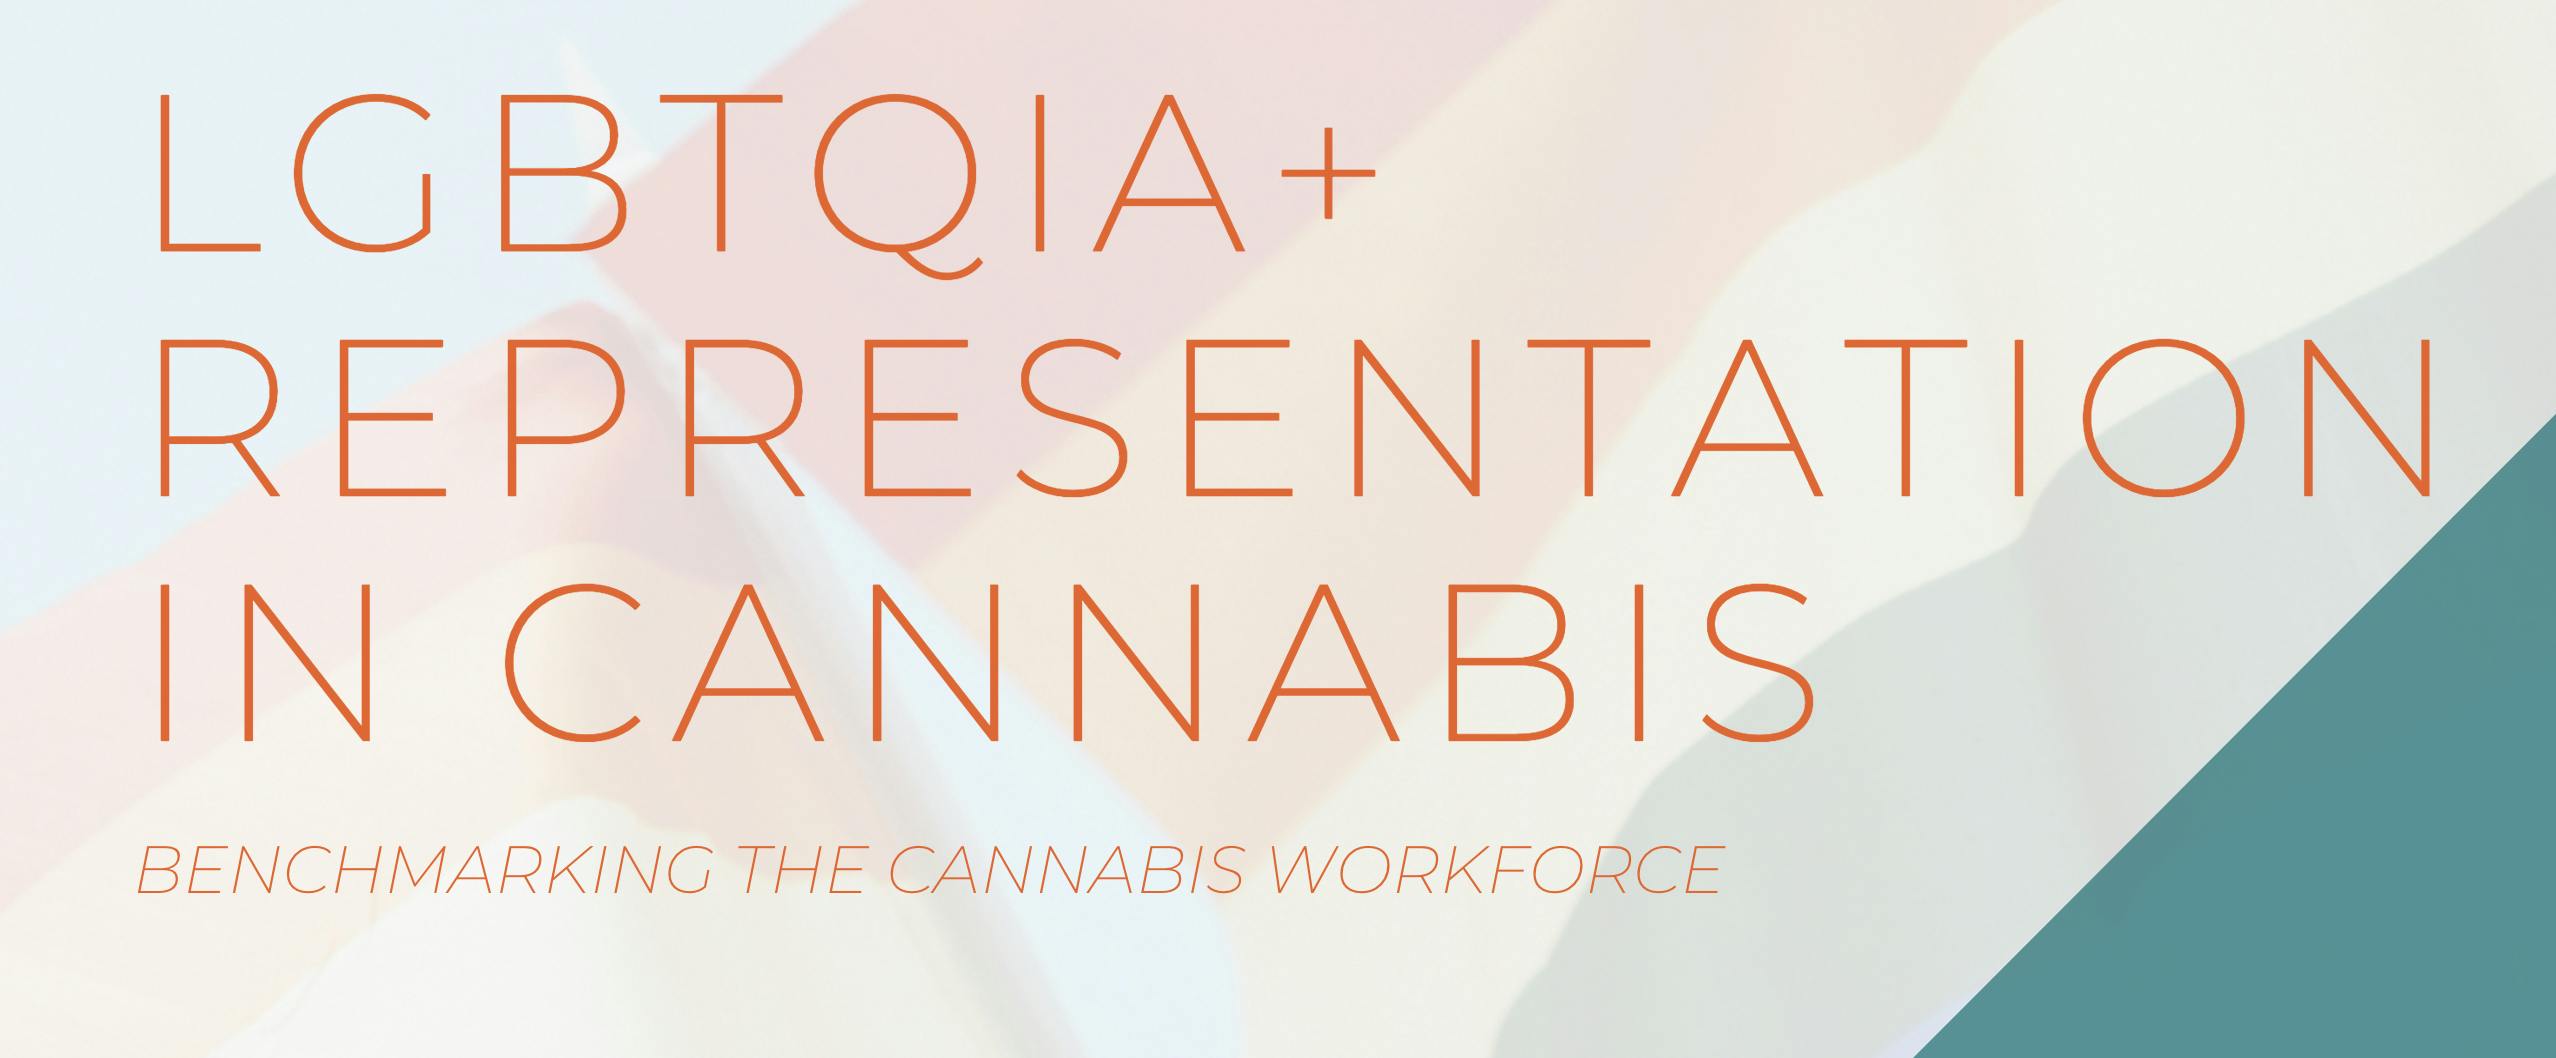 A Vangst analysis of LGBTQ+ representation in the cannabis workforce 